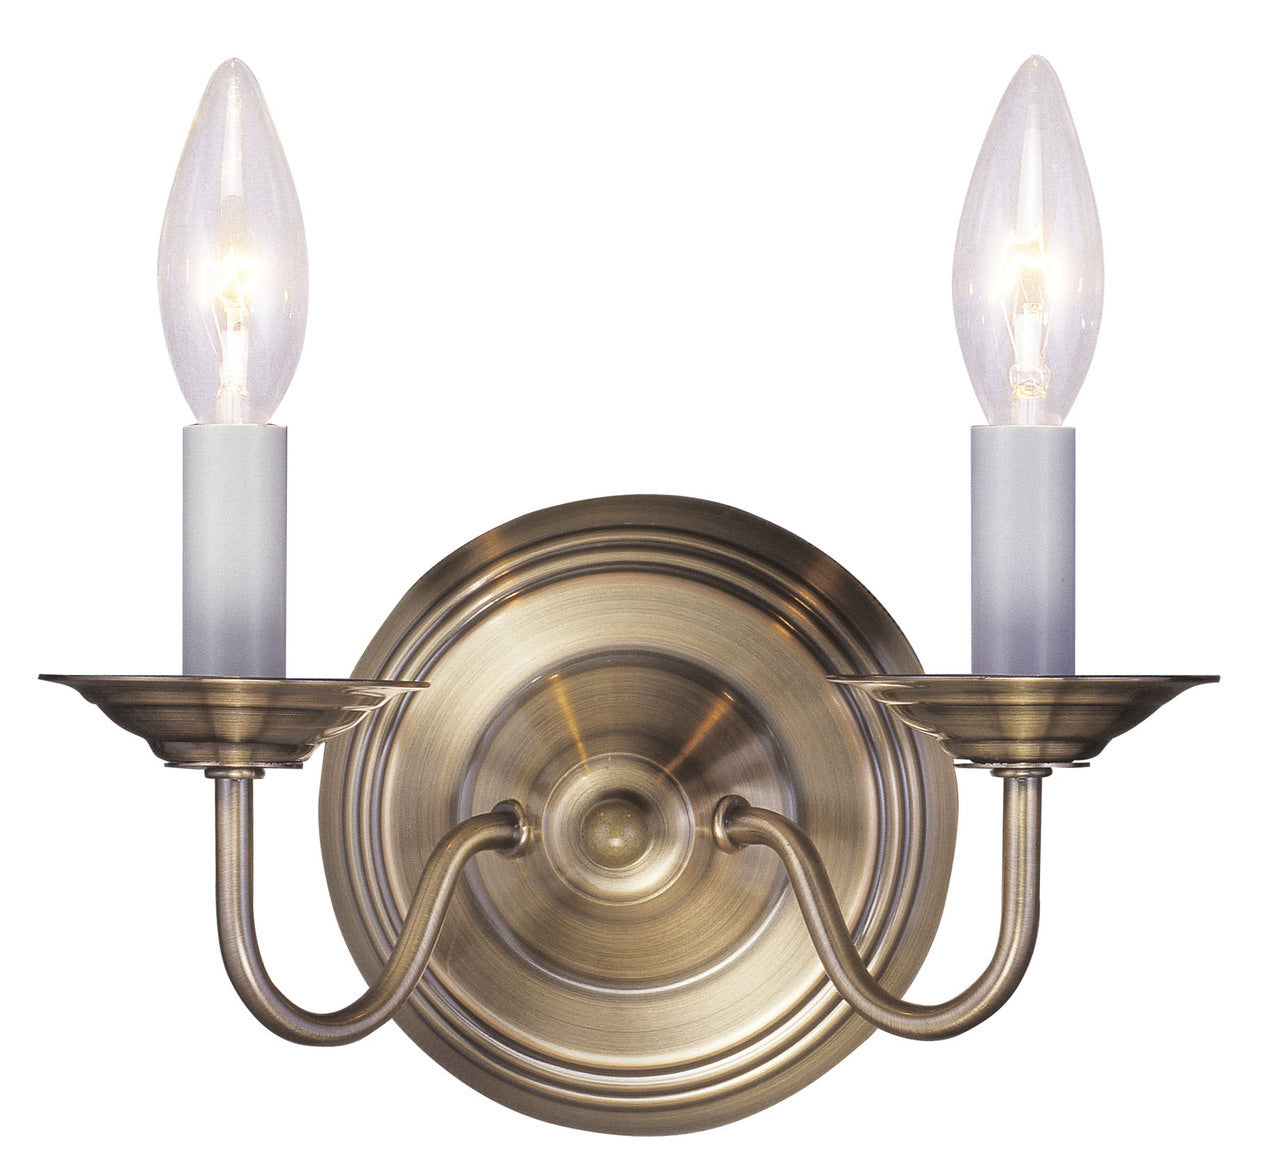 LIVEX Lighting 5018-01 Williamsburgh Wall Sconce in Antique Brass (2 Light)